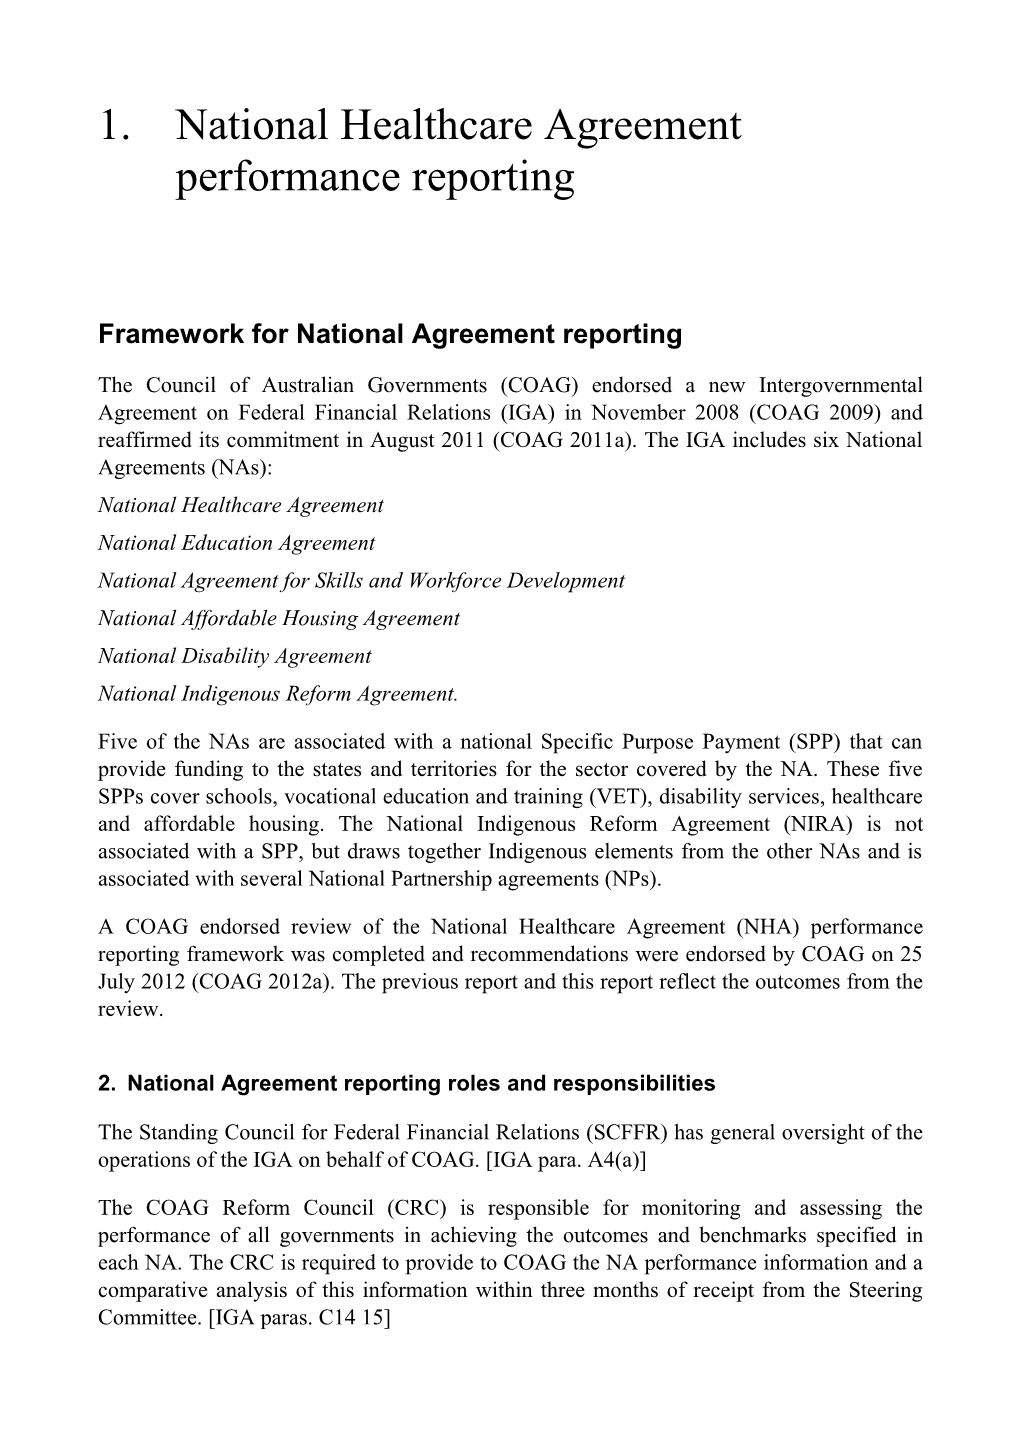 National Healthcare Agreement - National Agreement Performance Information 2012-13